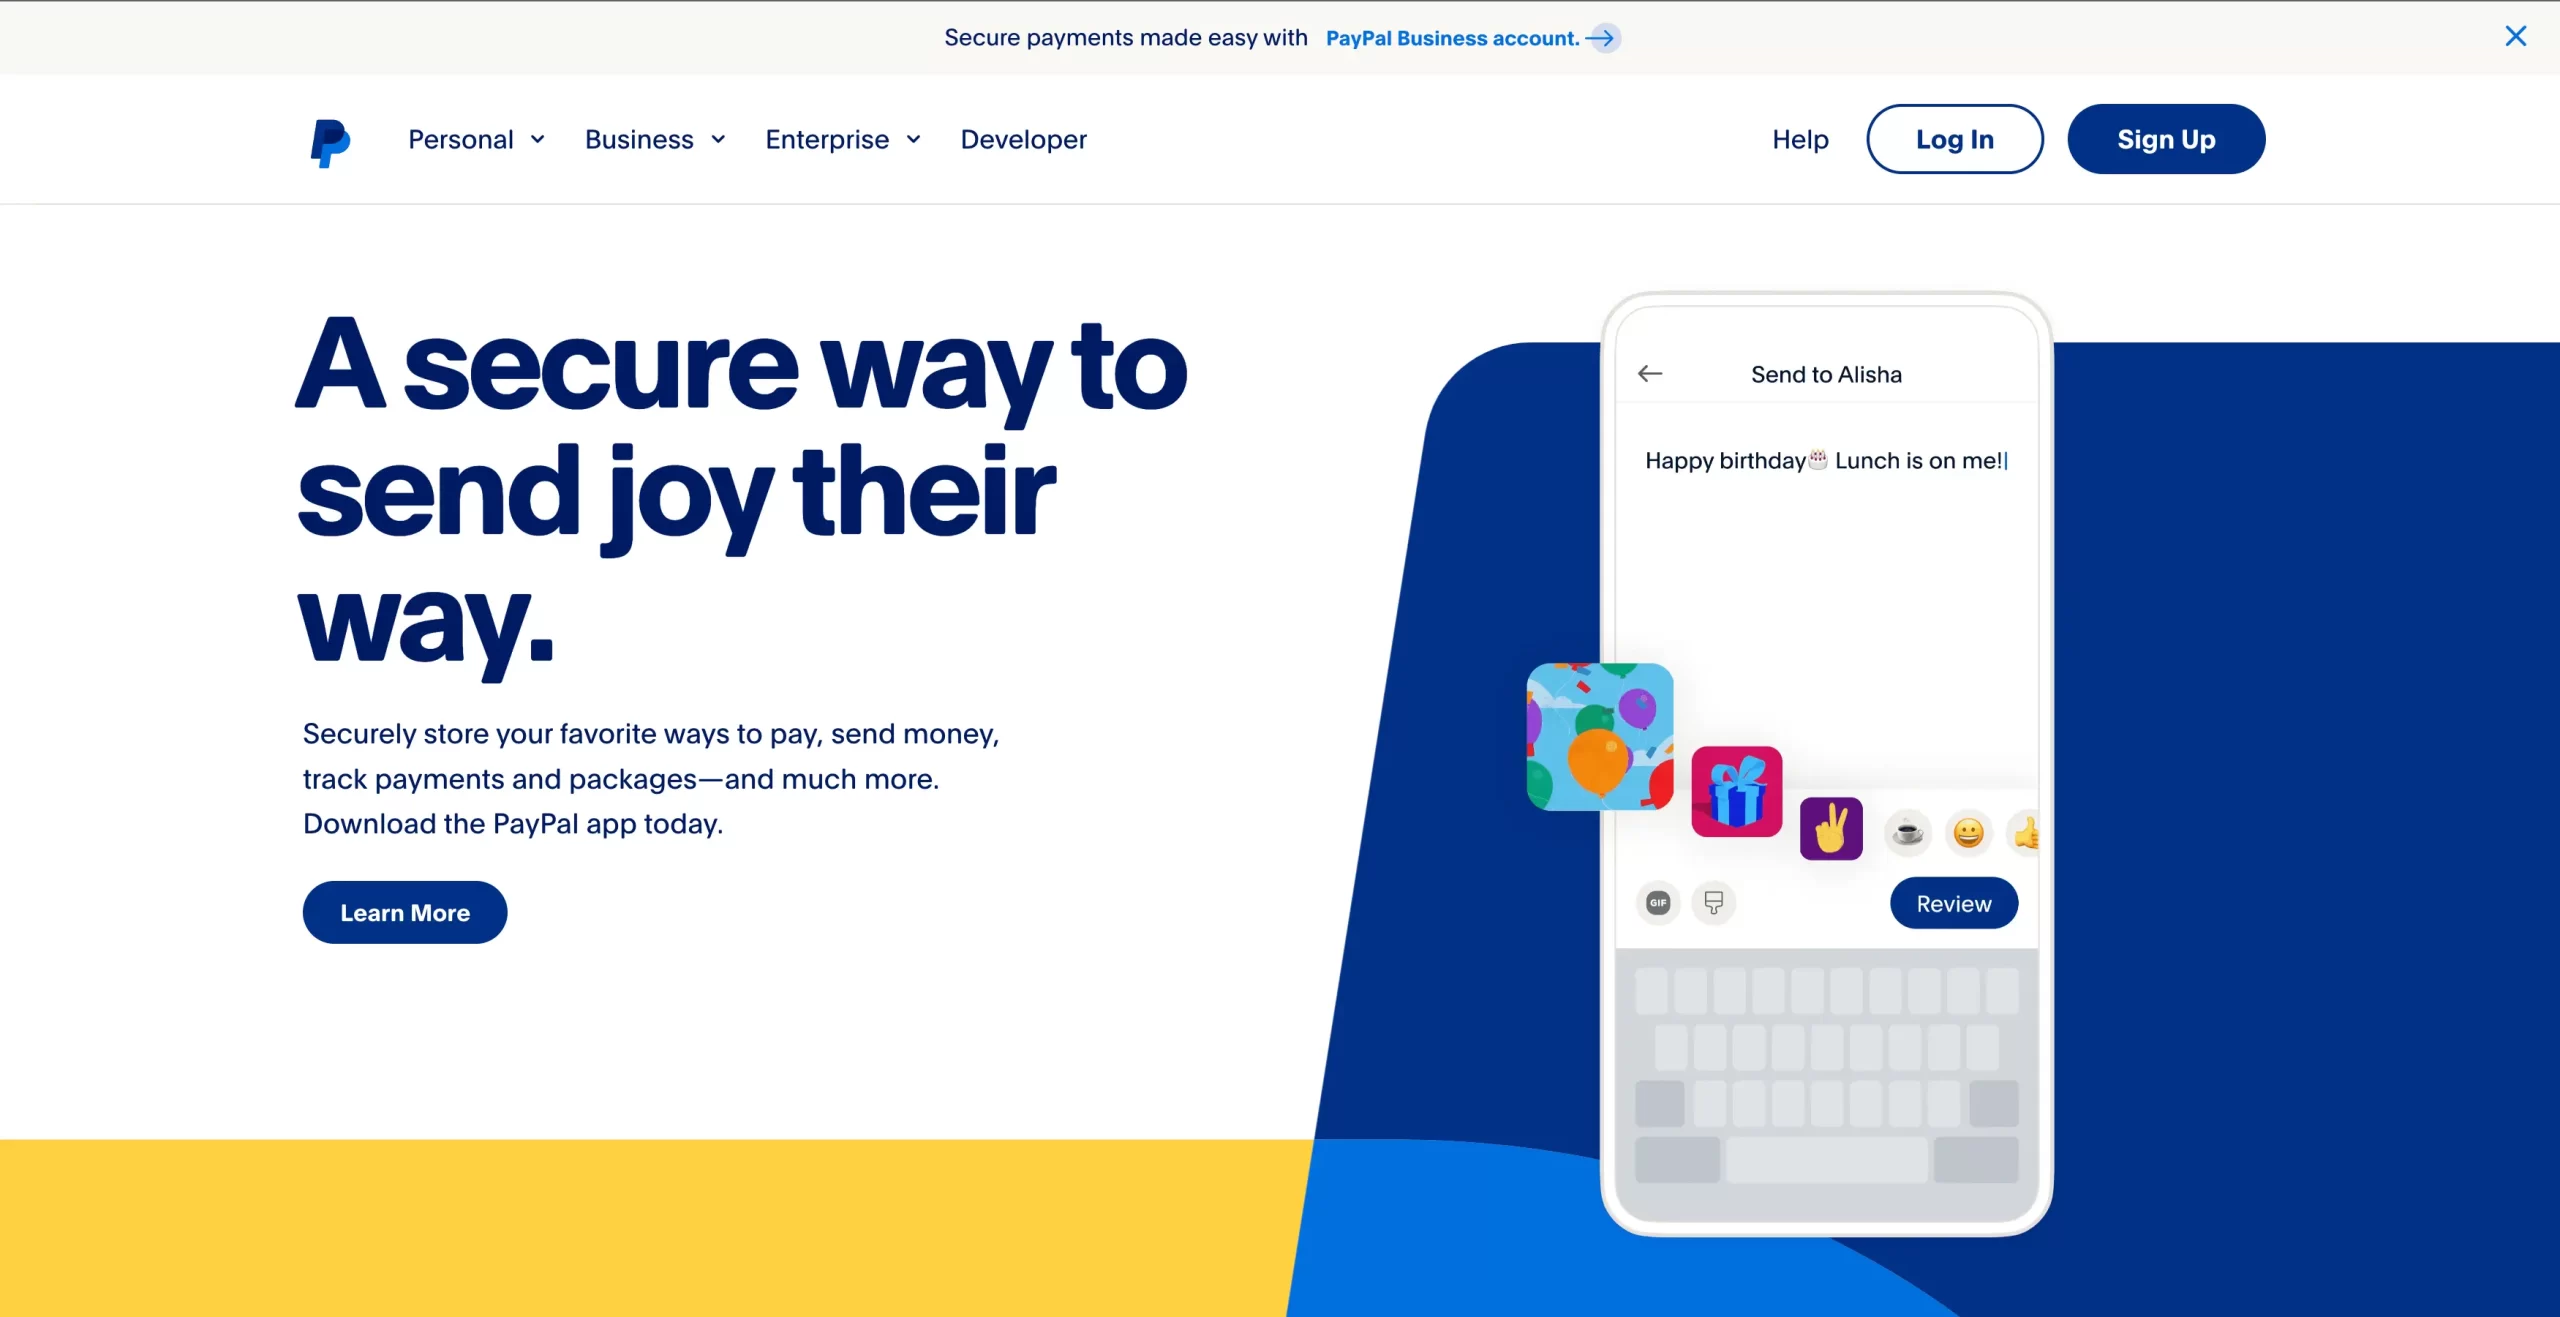 Landing Page Example - PayPal